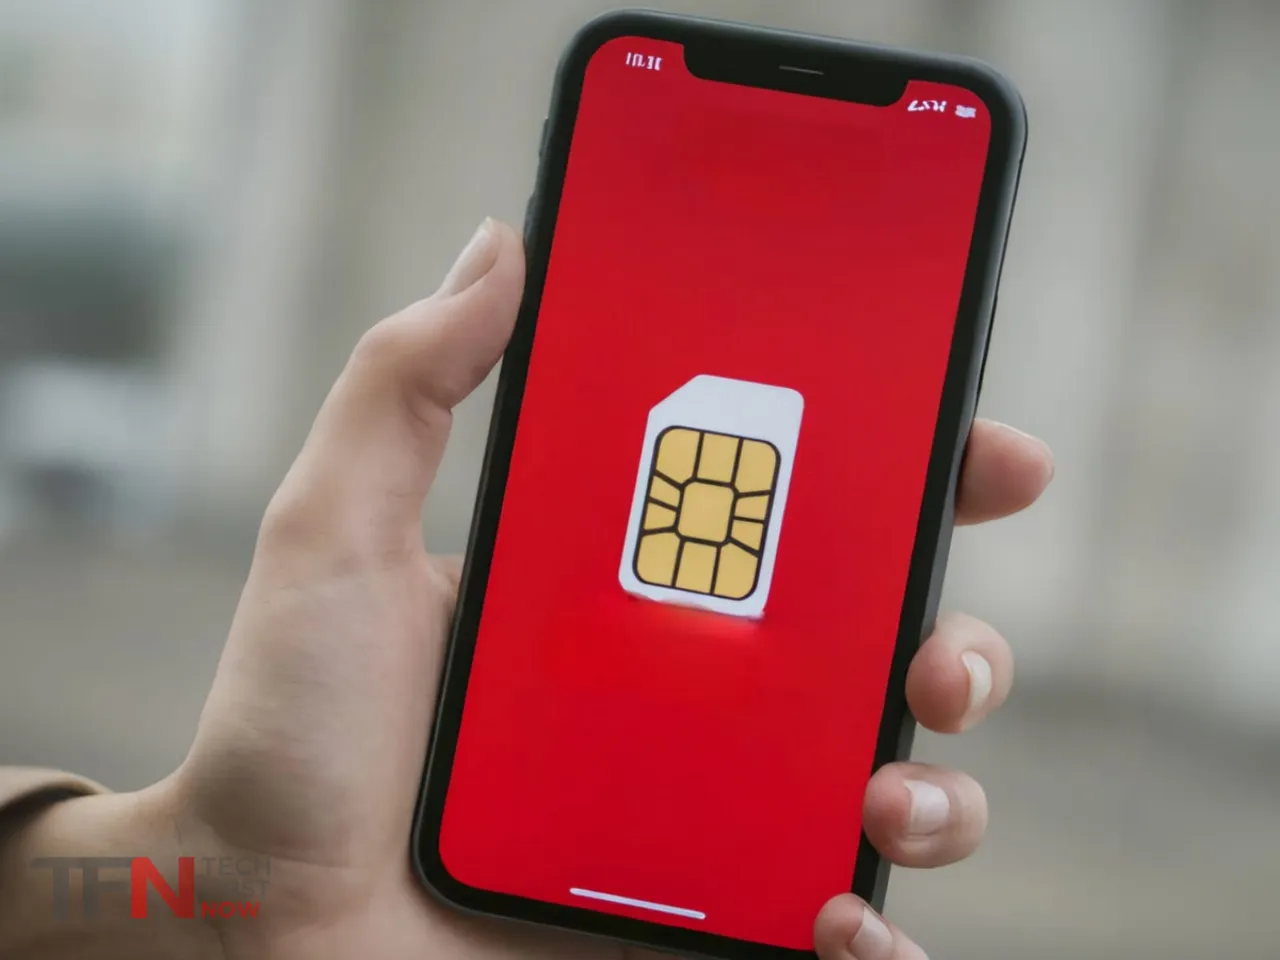 Fix the 'No SIM Card Installed' Error on iPhone